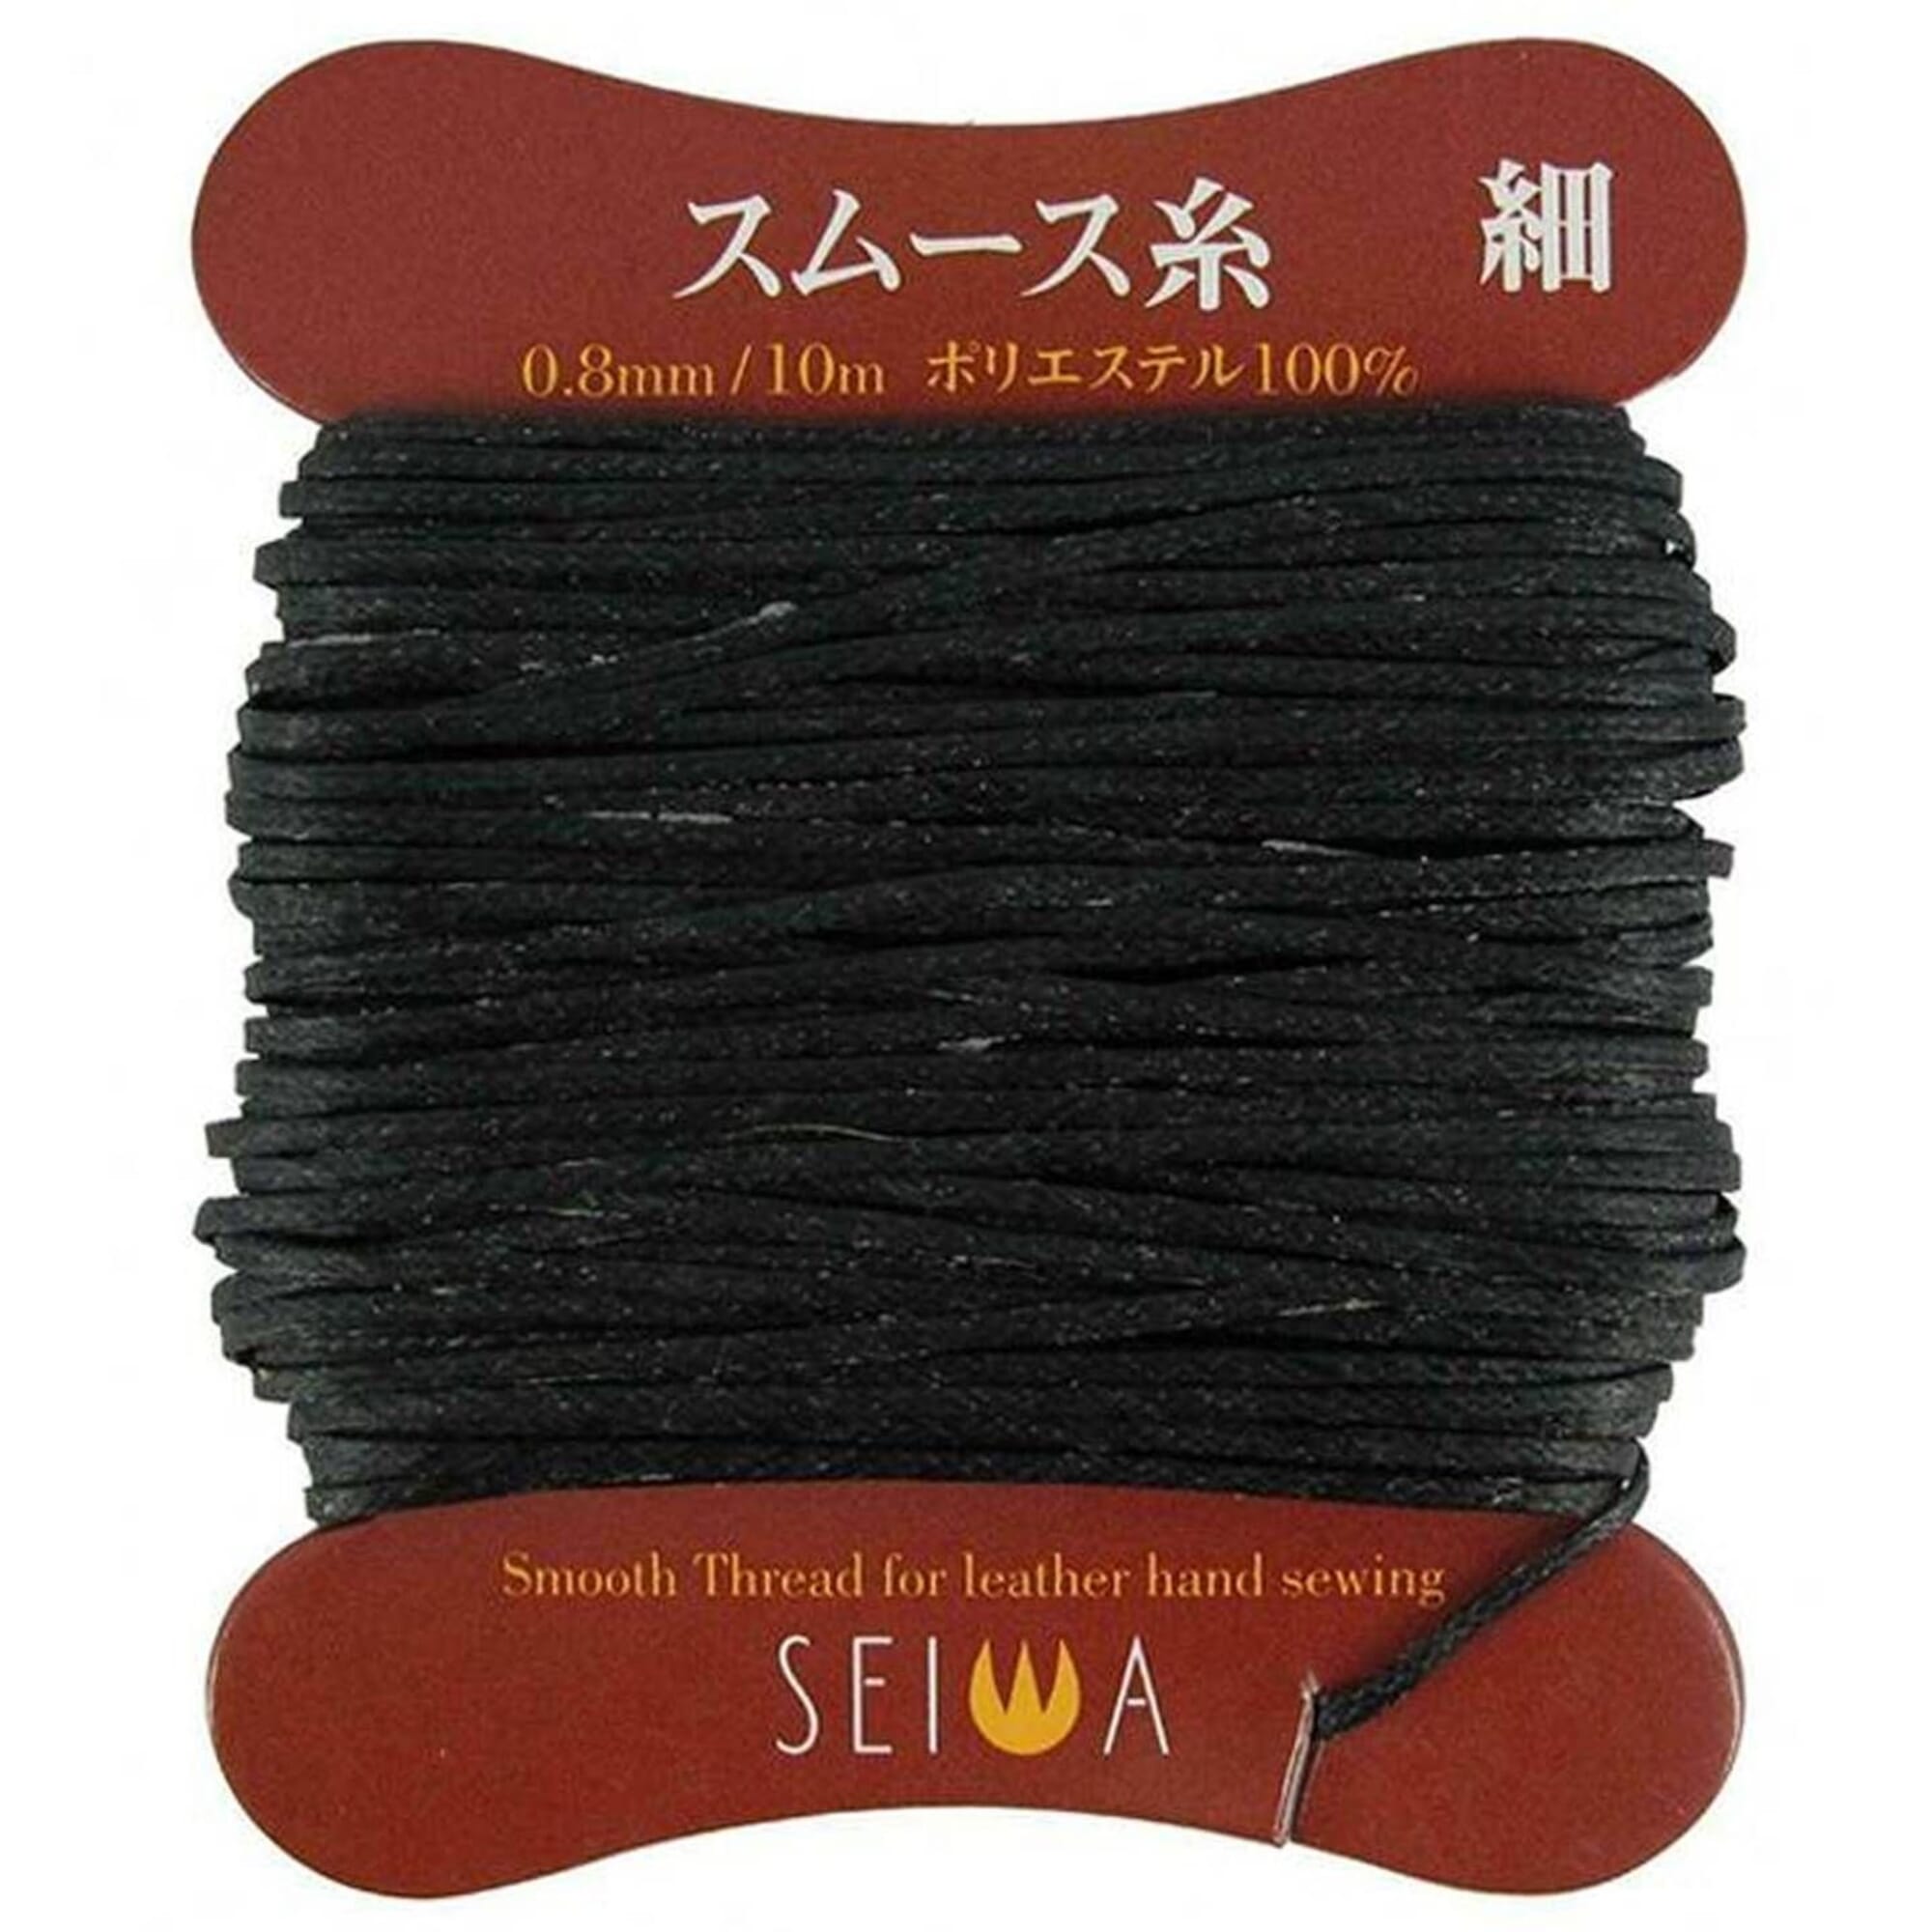 Seiwa Leathercraft Hand Sewing Tool 1mm Heavy-Duty Non-Stretch Black 10M Polyester Waxed Smooth Leather Thread, for Stitching Leatherwork